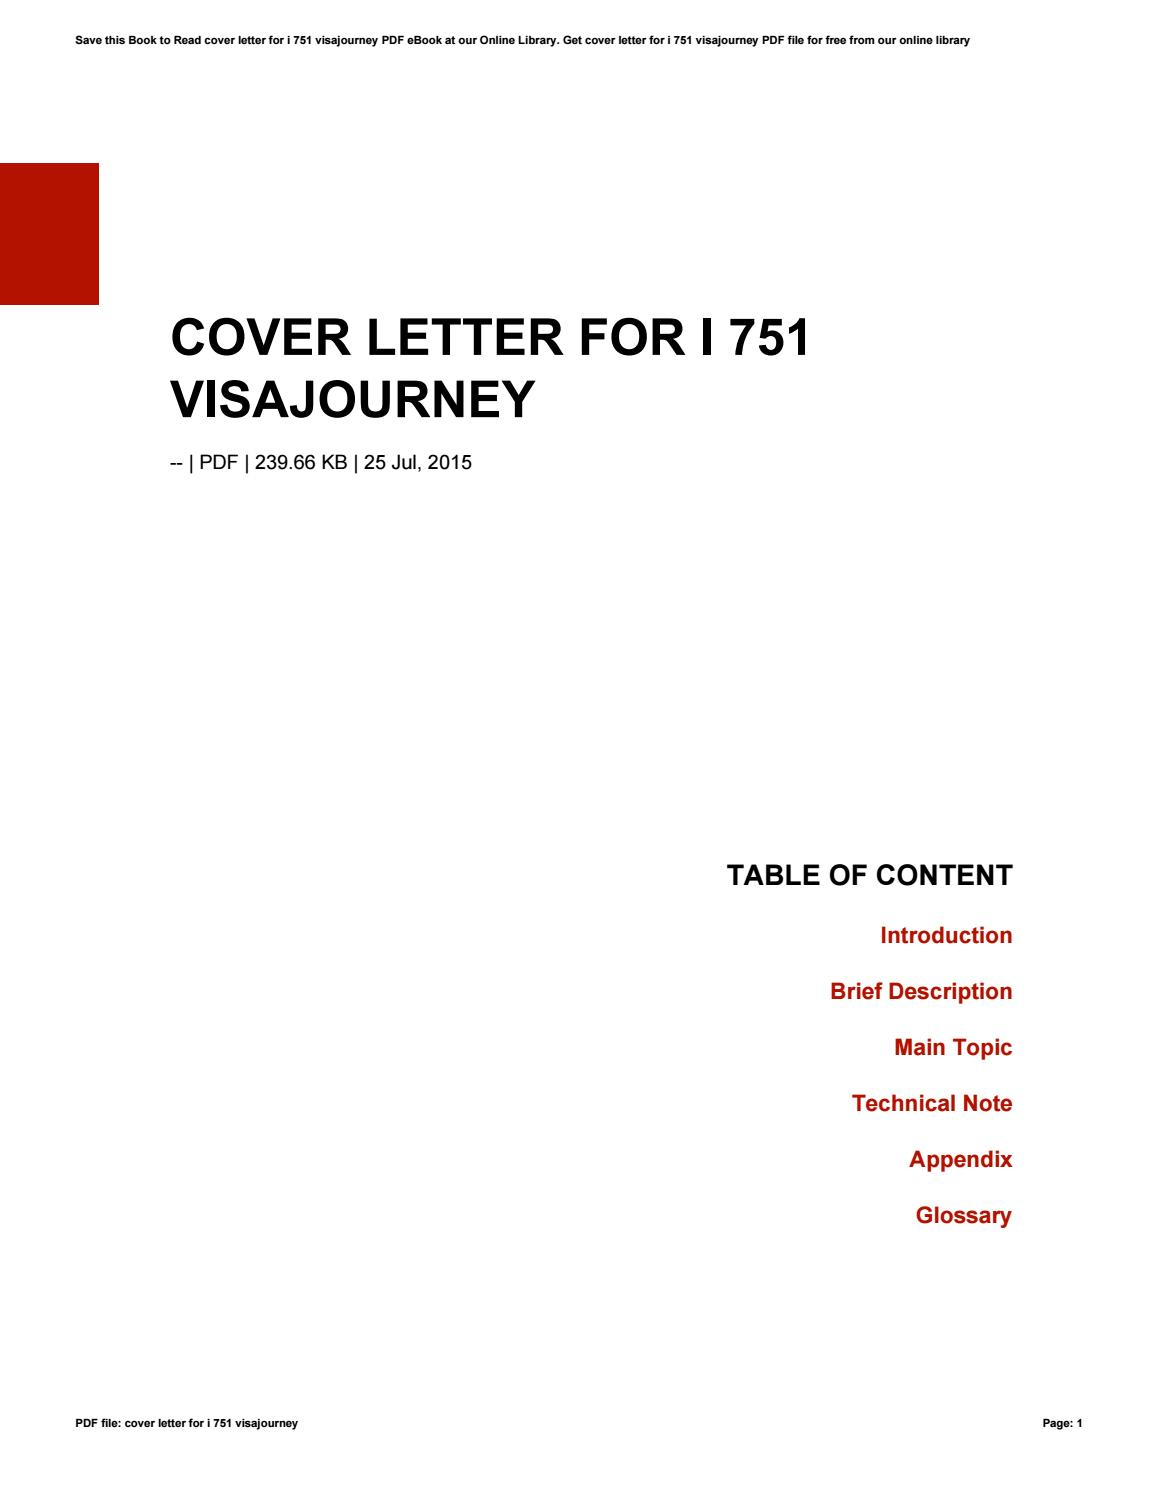 Cover Letter For I 751 Visajourney Litwinmarvis8 Issuu for measurements 1156 X 1496